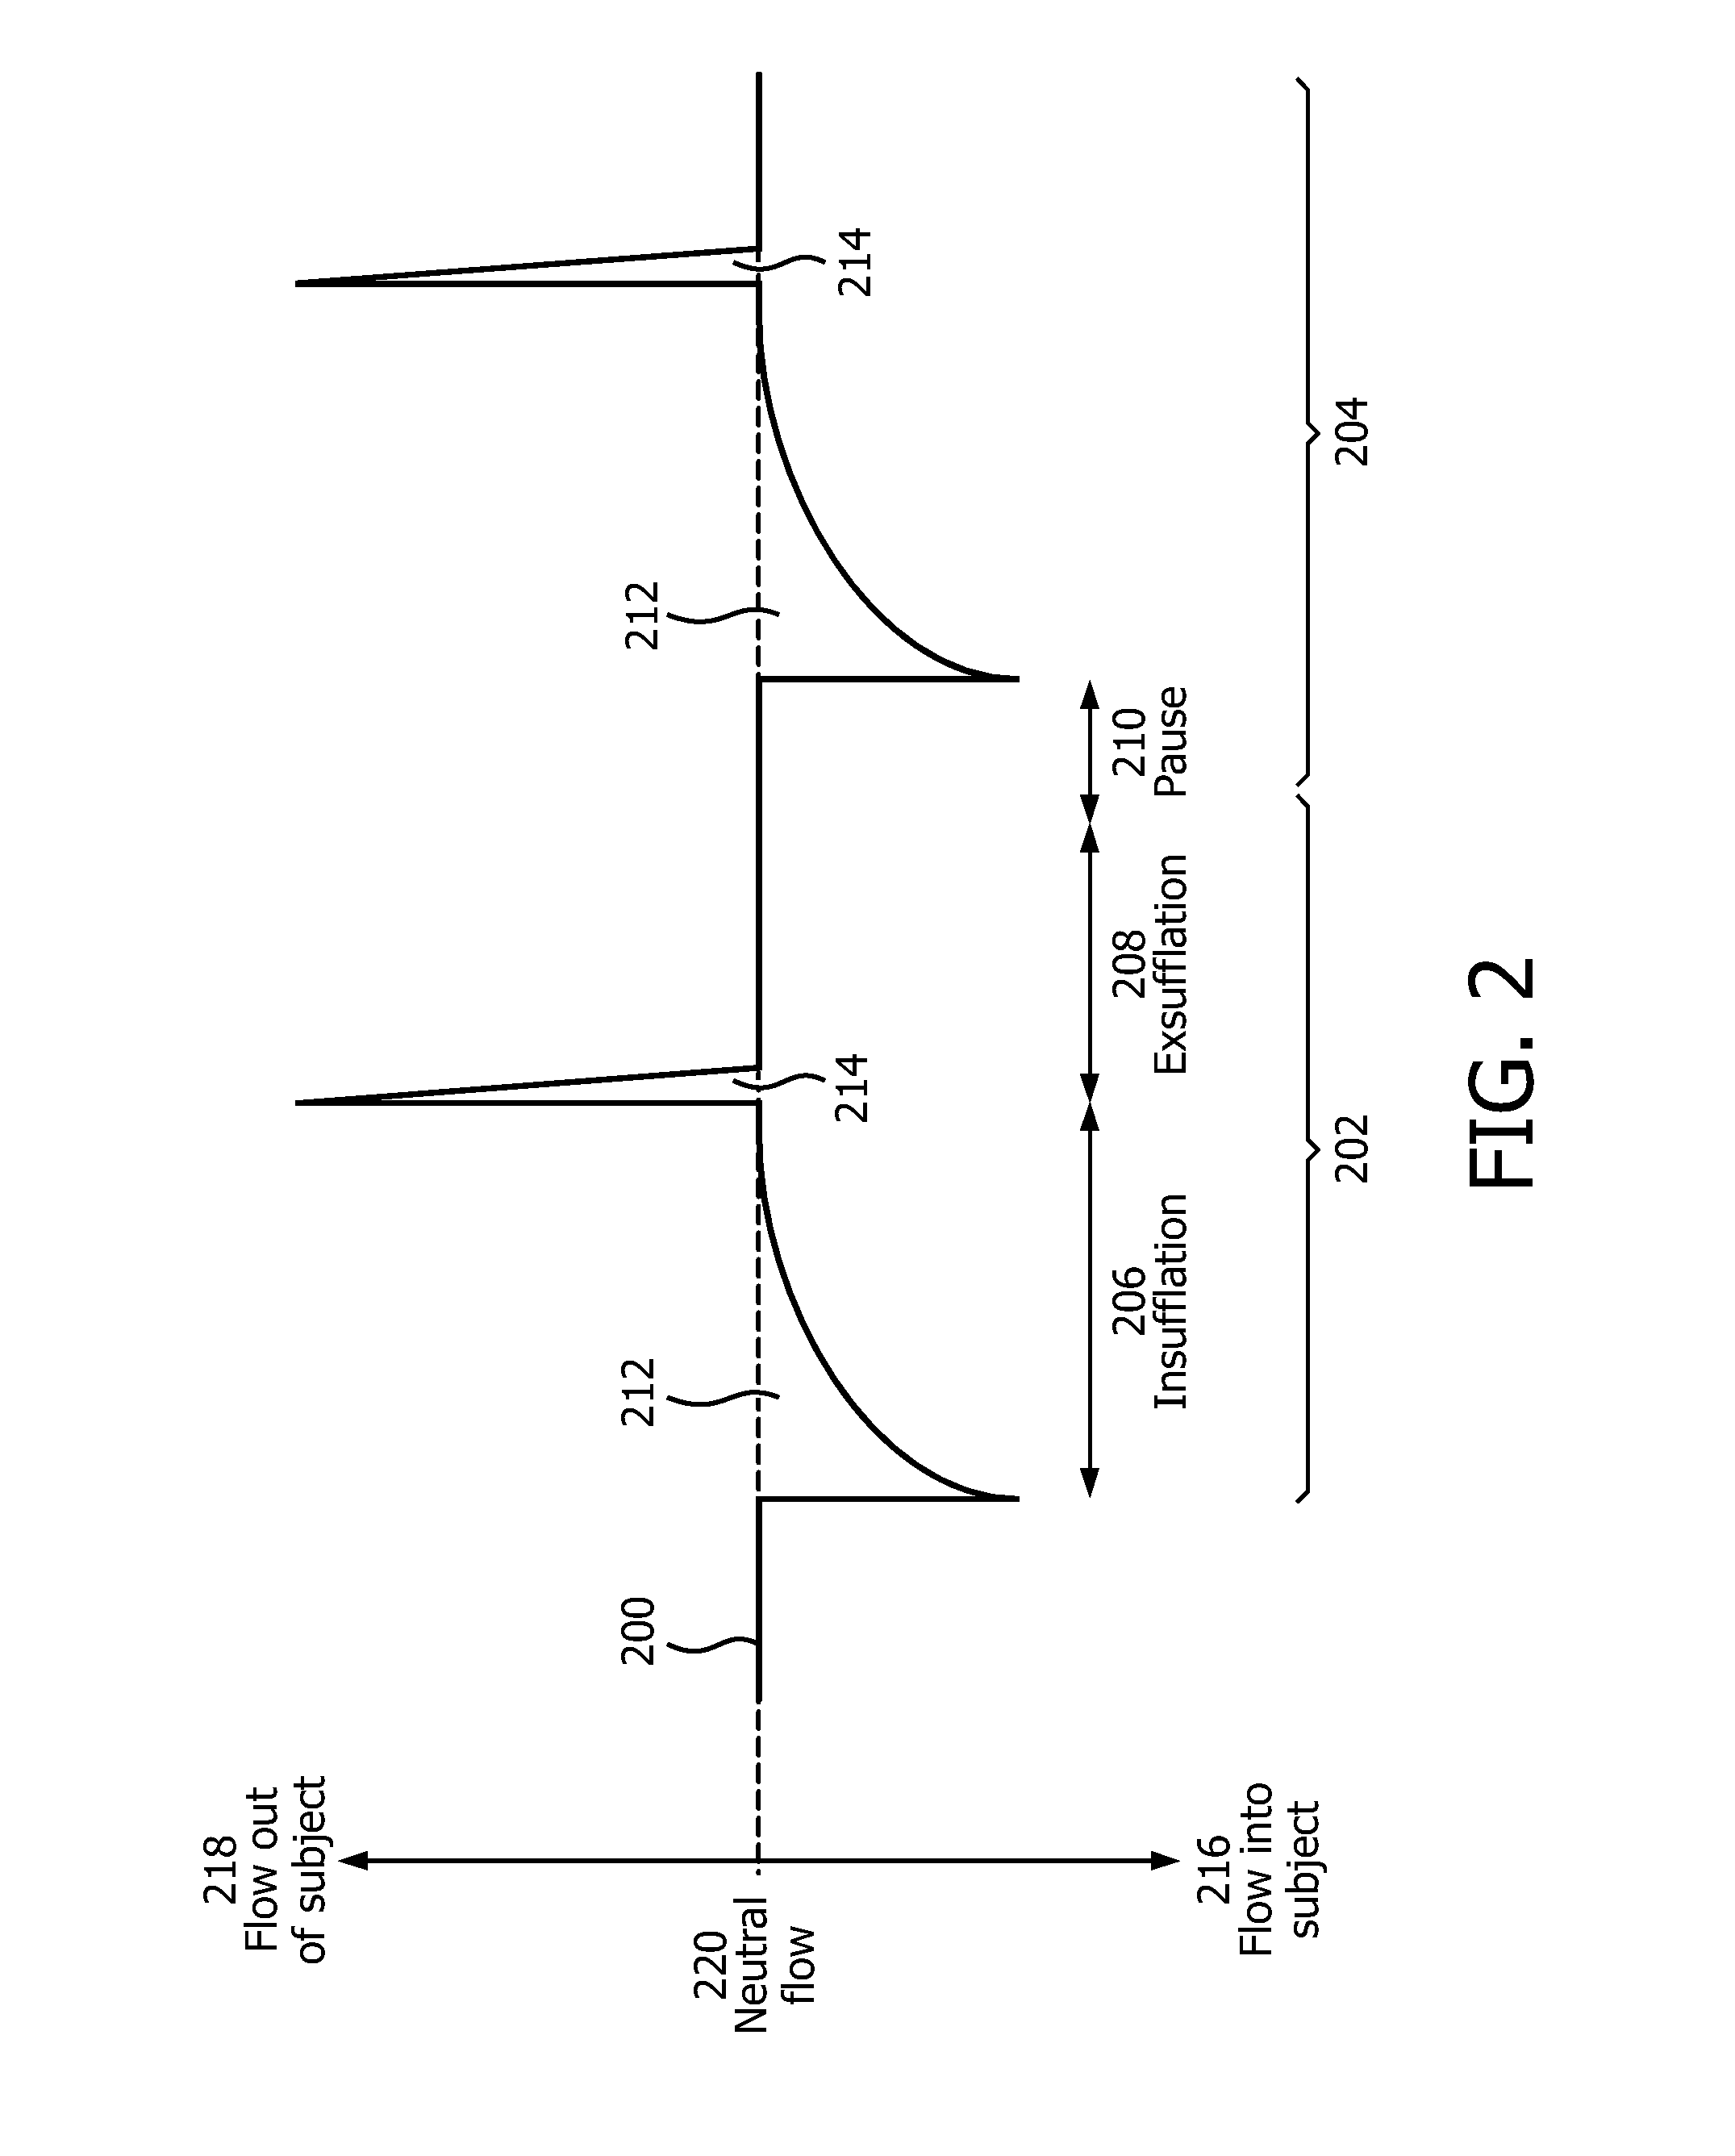 System and method for controlling exsufflation pressure during in-exsufflation